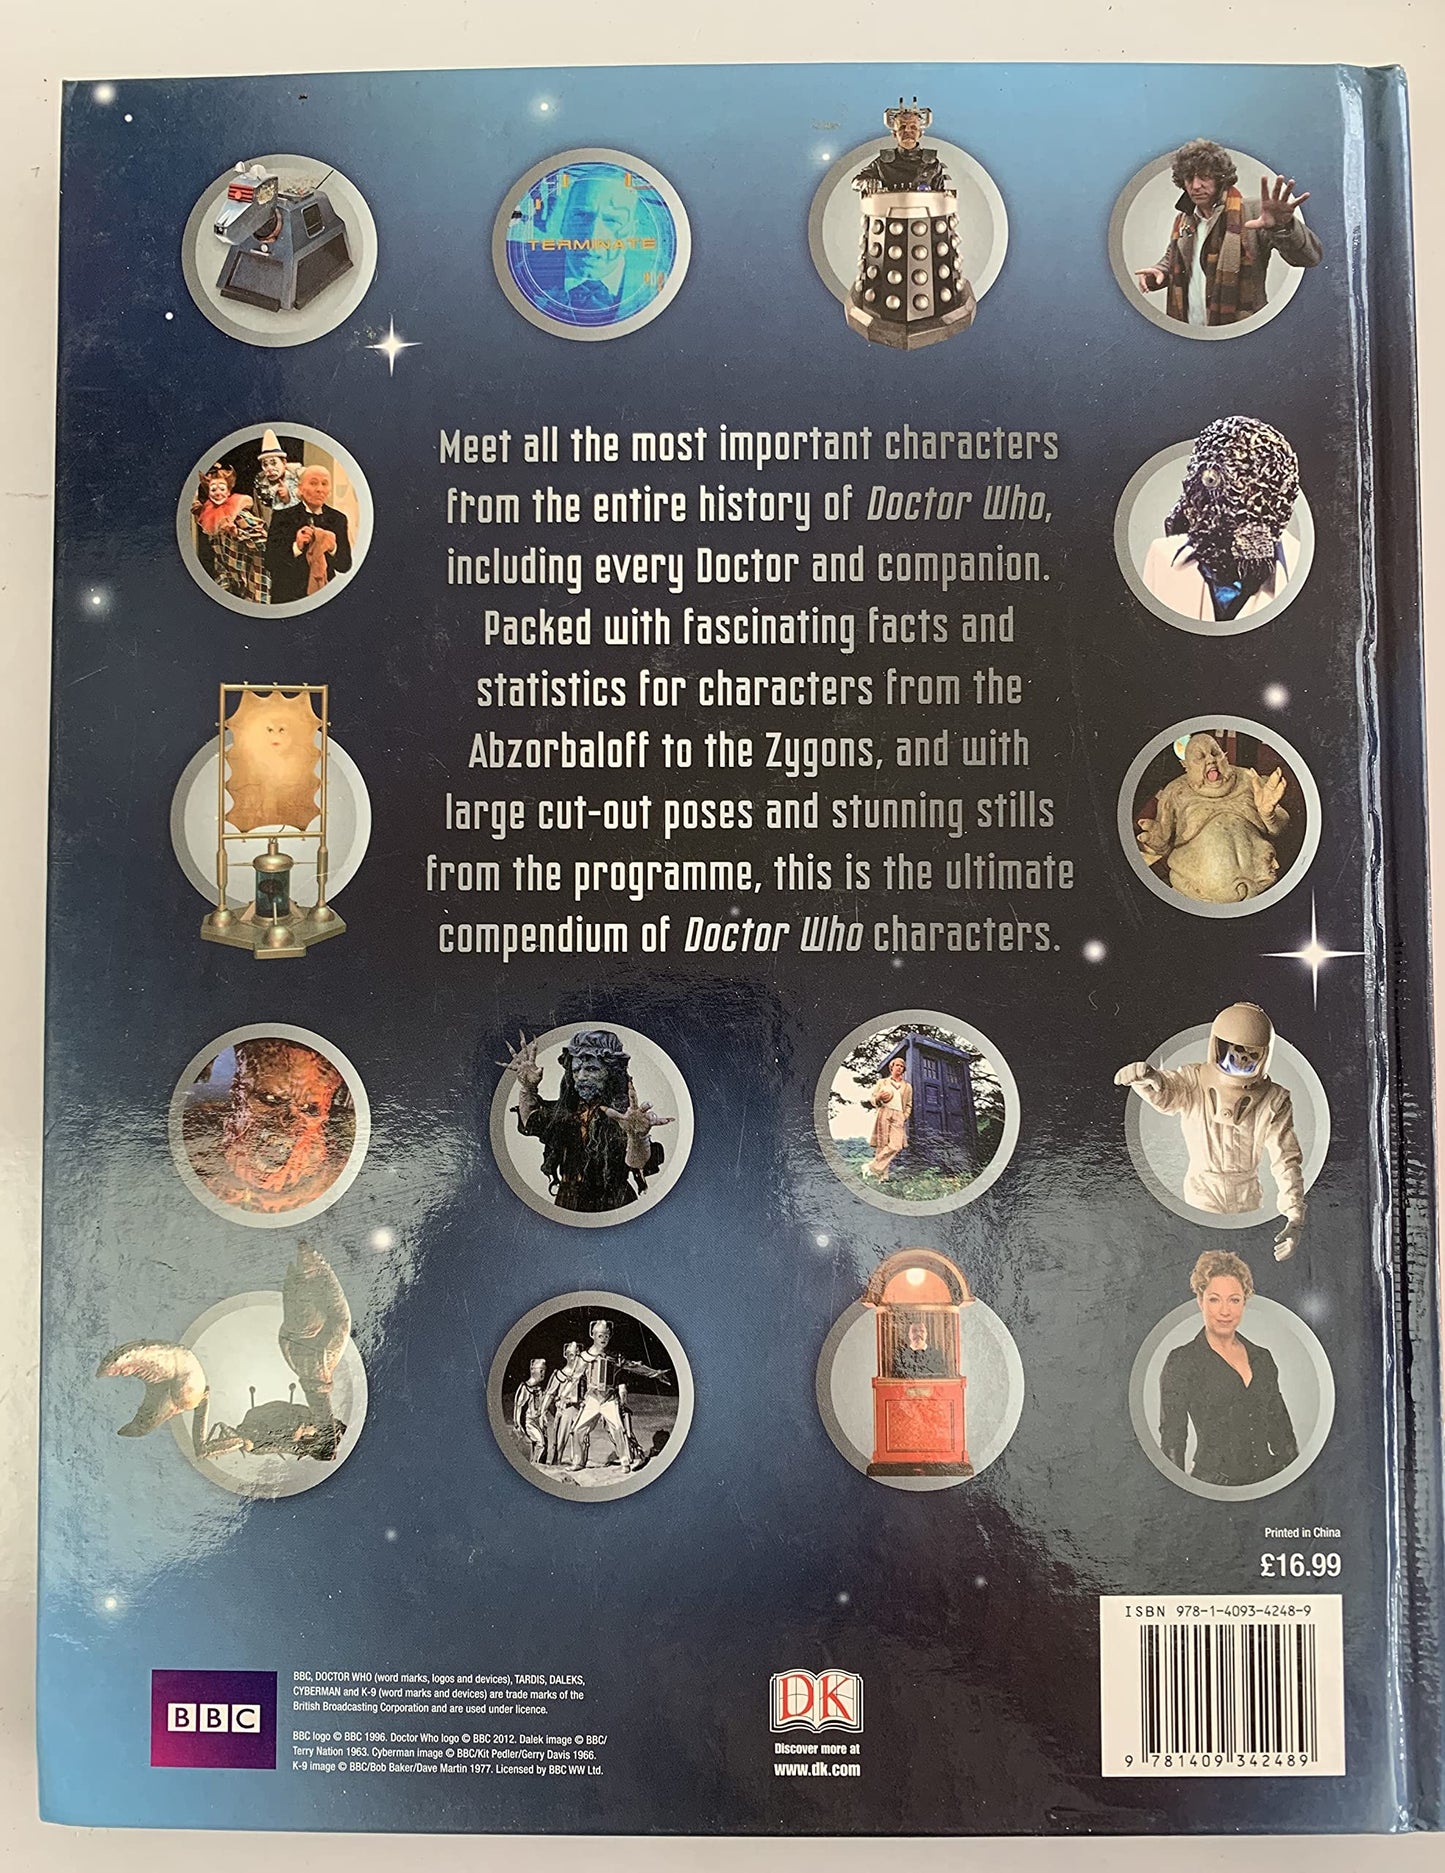 Vintage 2013 Doctor Who Character Encyclopedia - With All 11 Doctors Ans More Than 200 Friends And Foes - Hard Back Book